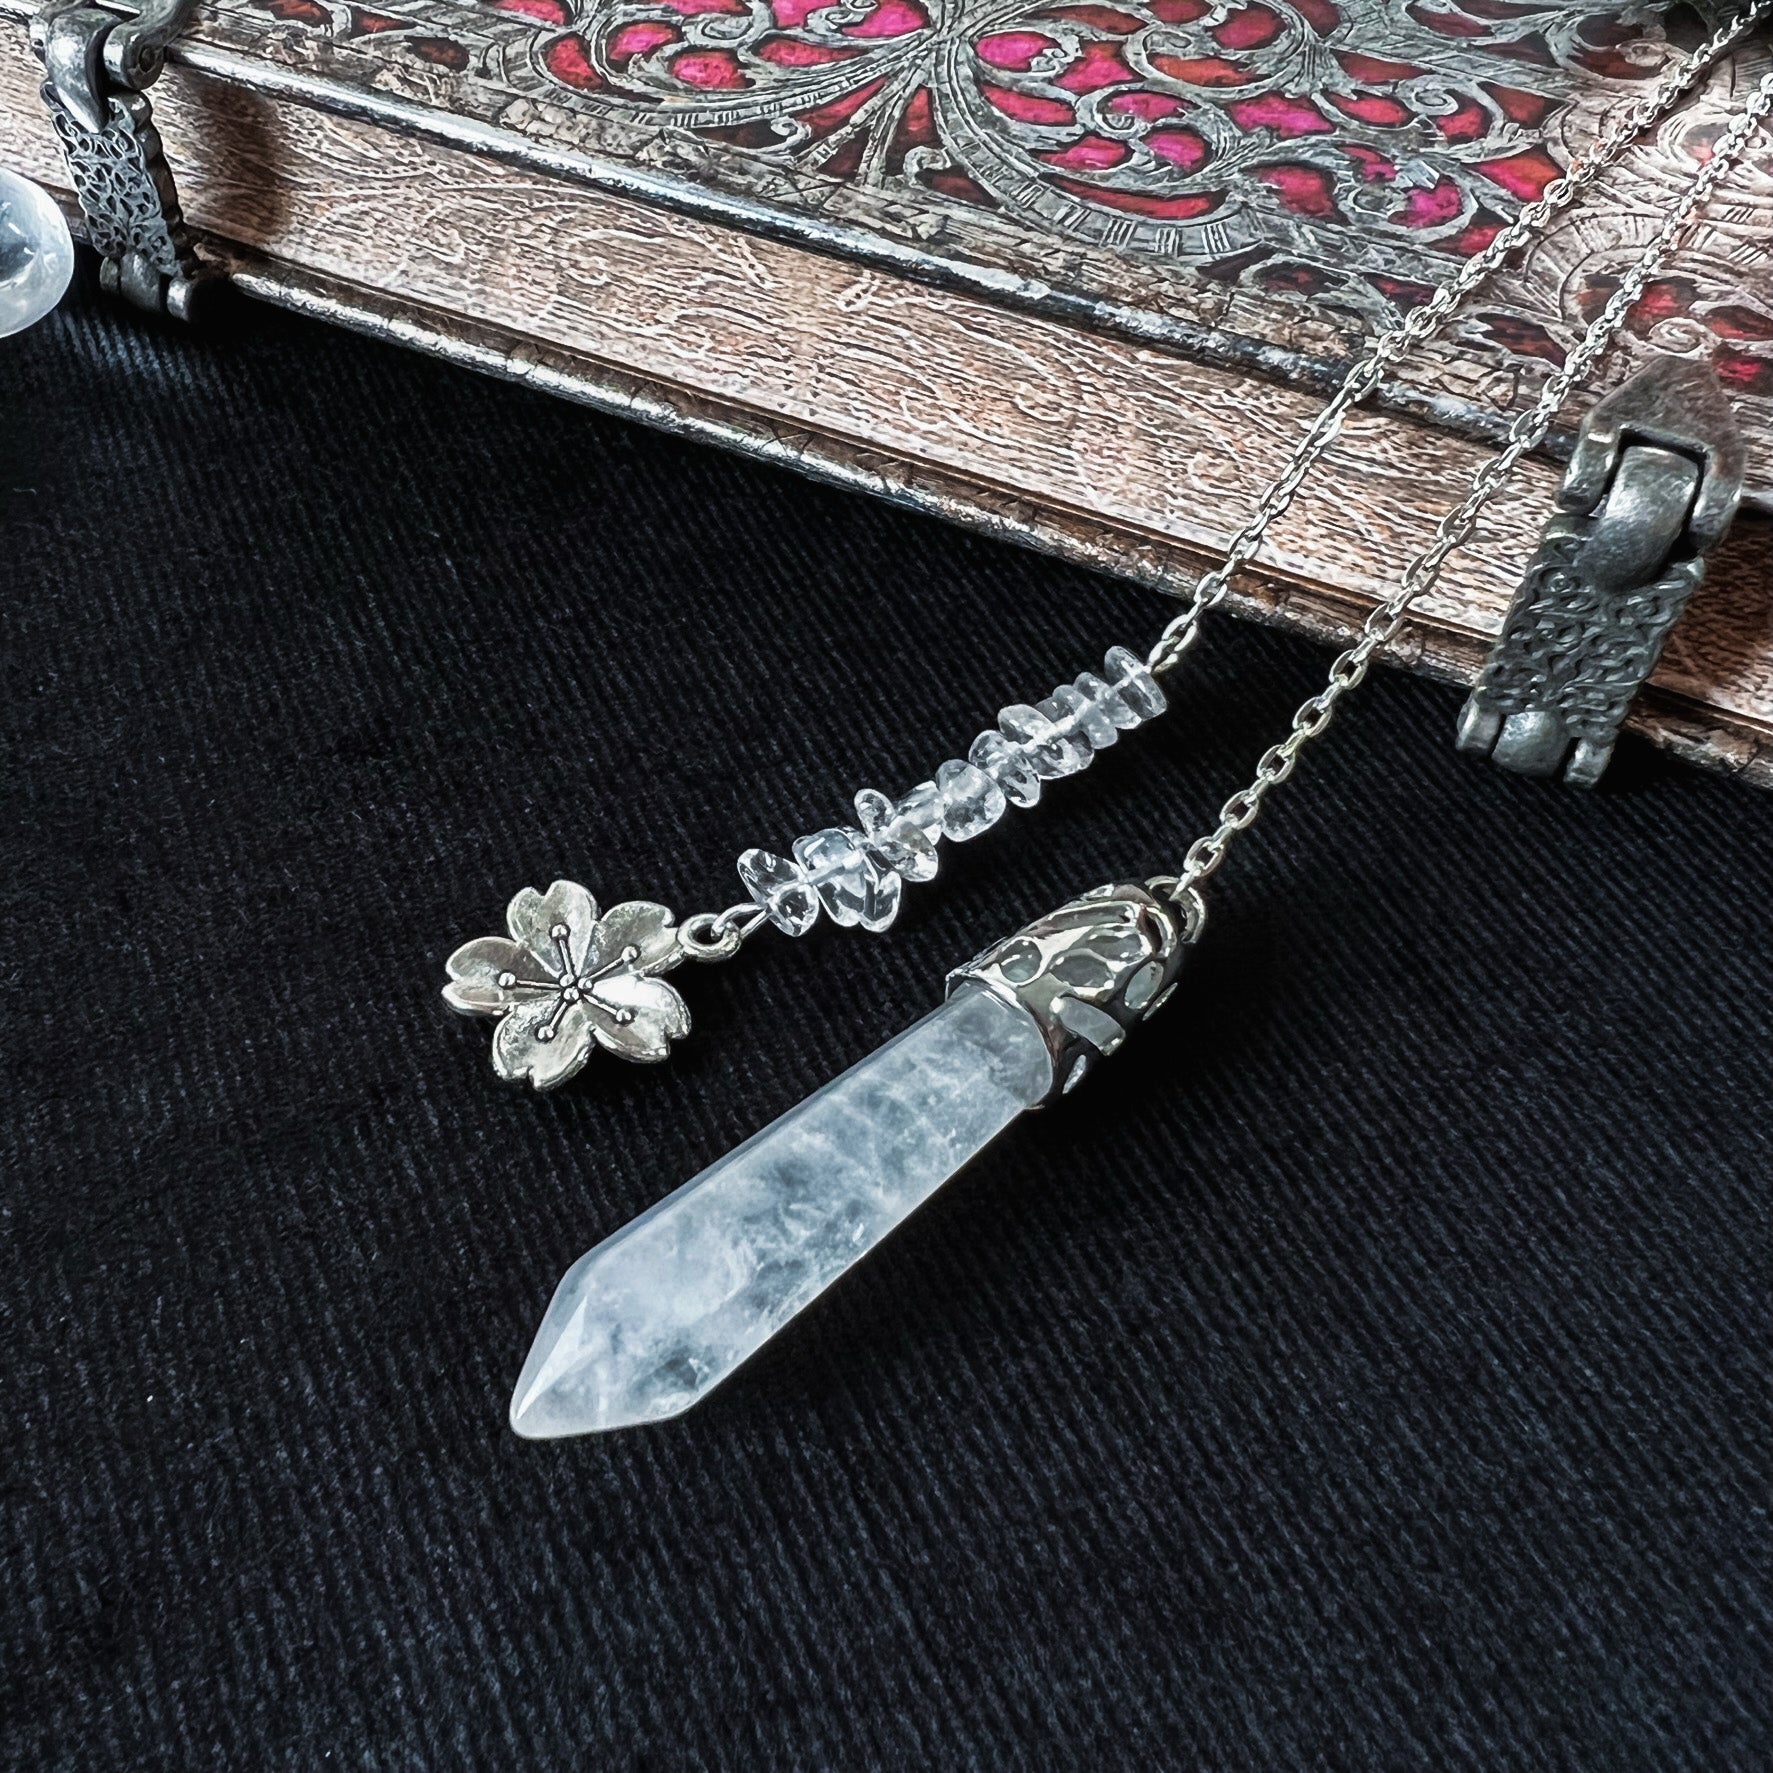 Clear quartz and flower divination pendulum - The French Witch shop